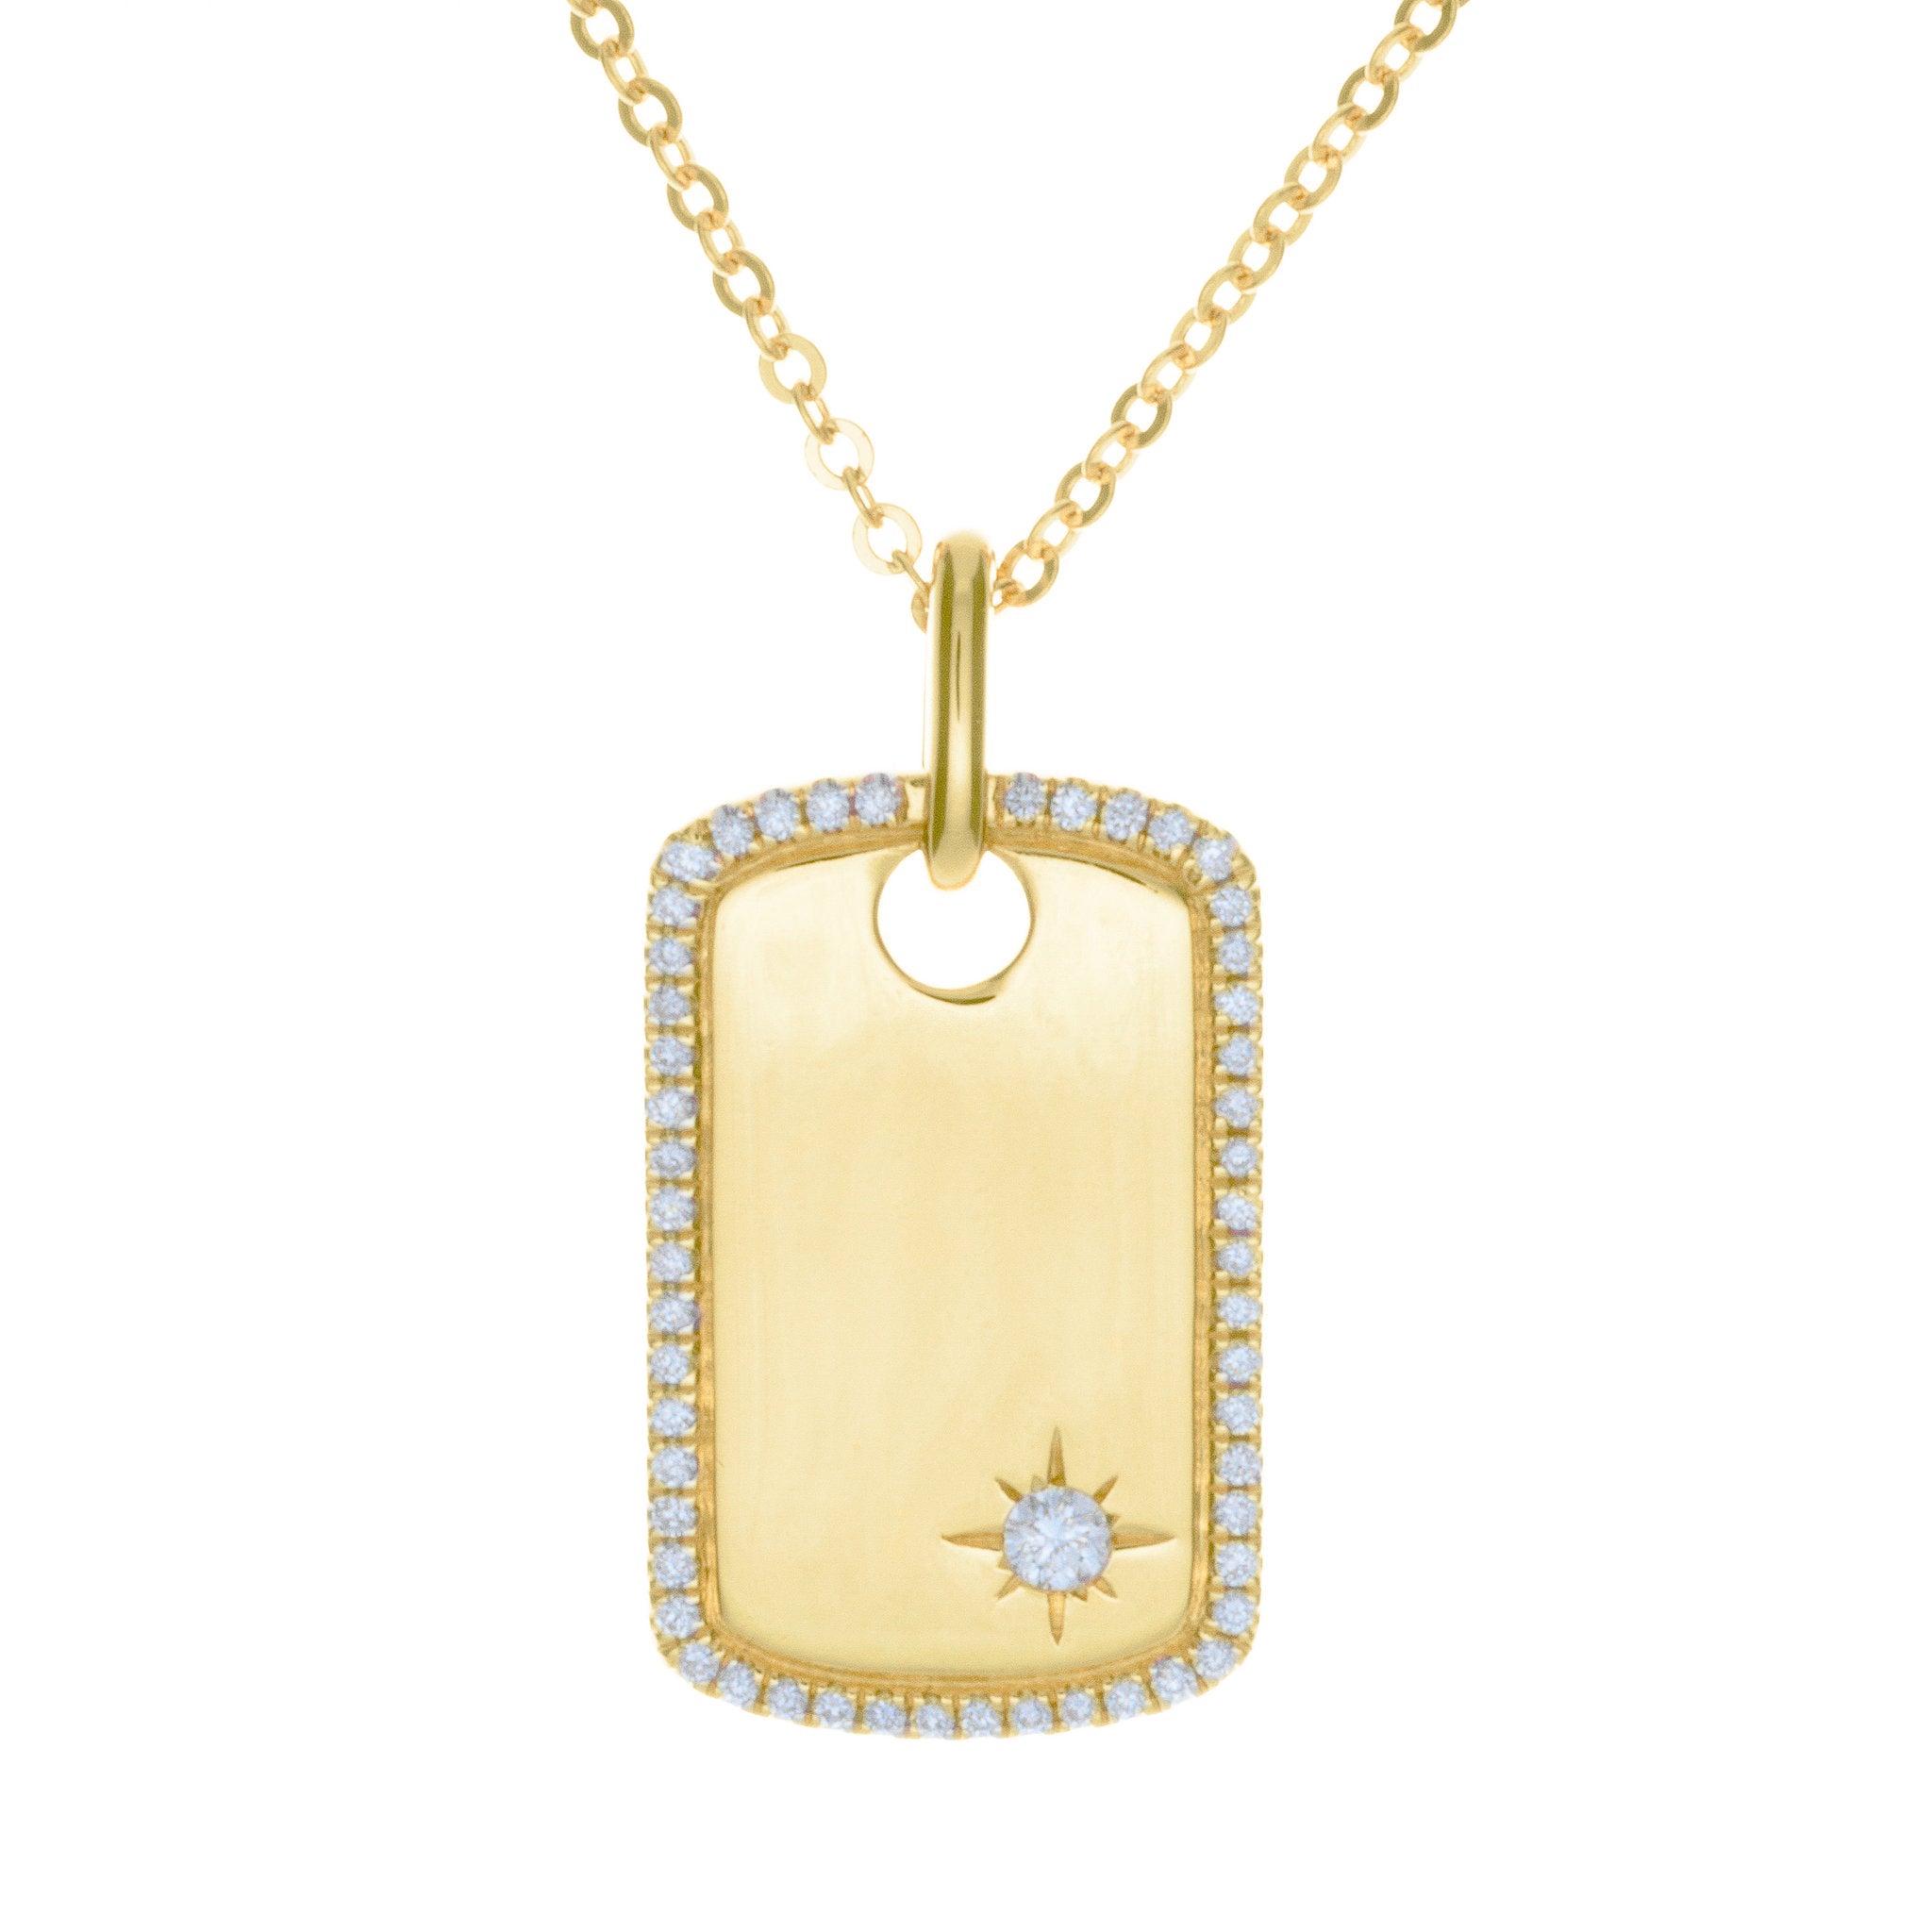 Tiffany & Co. Makers ID Dog Tag Necklace in 18K Yellow Gold | New York  Jewelers Chicago